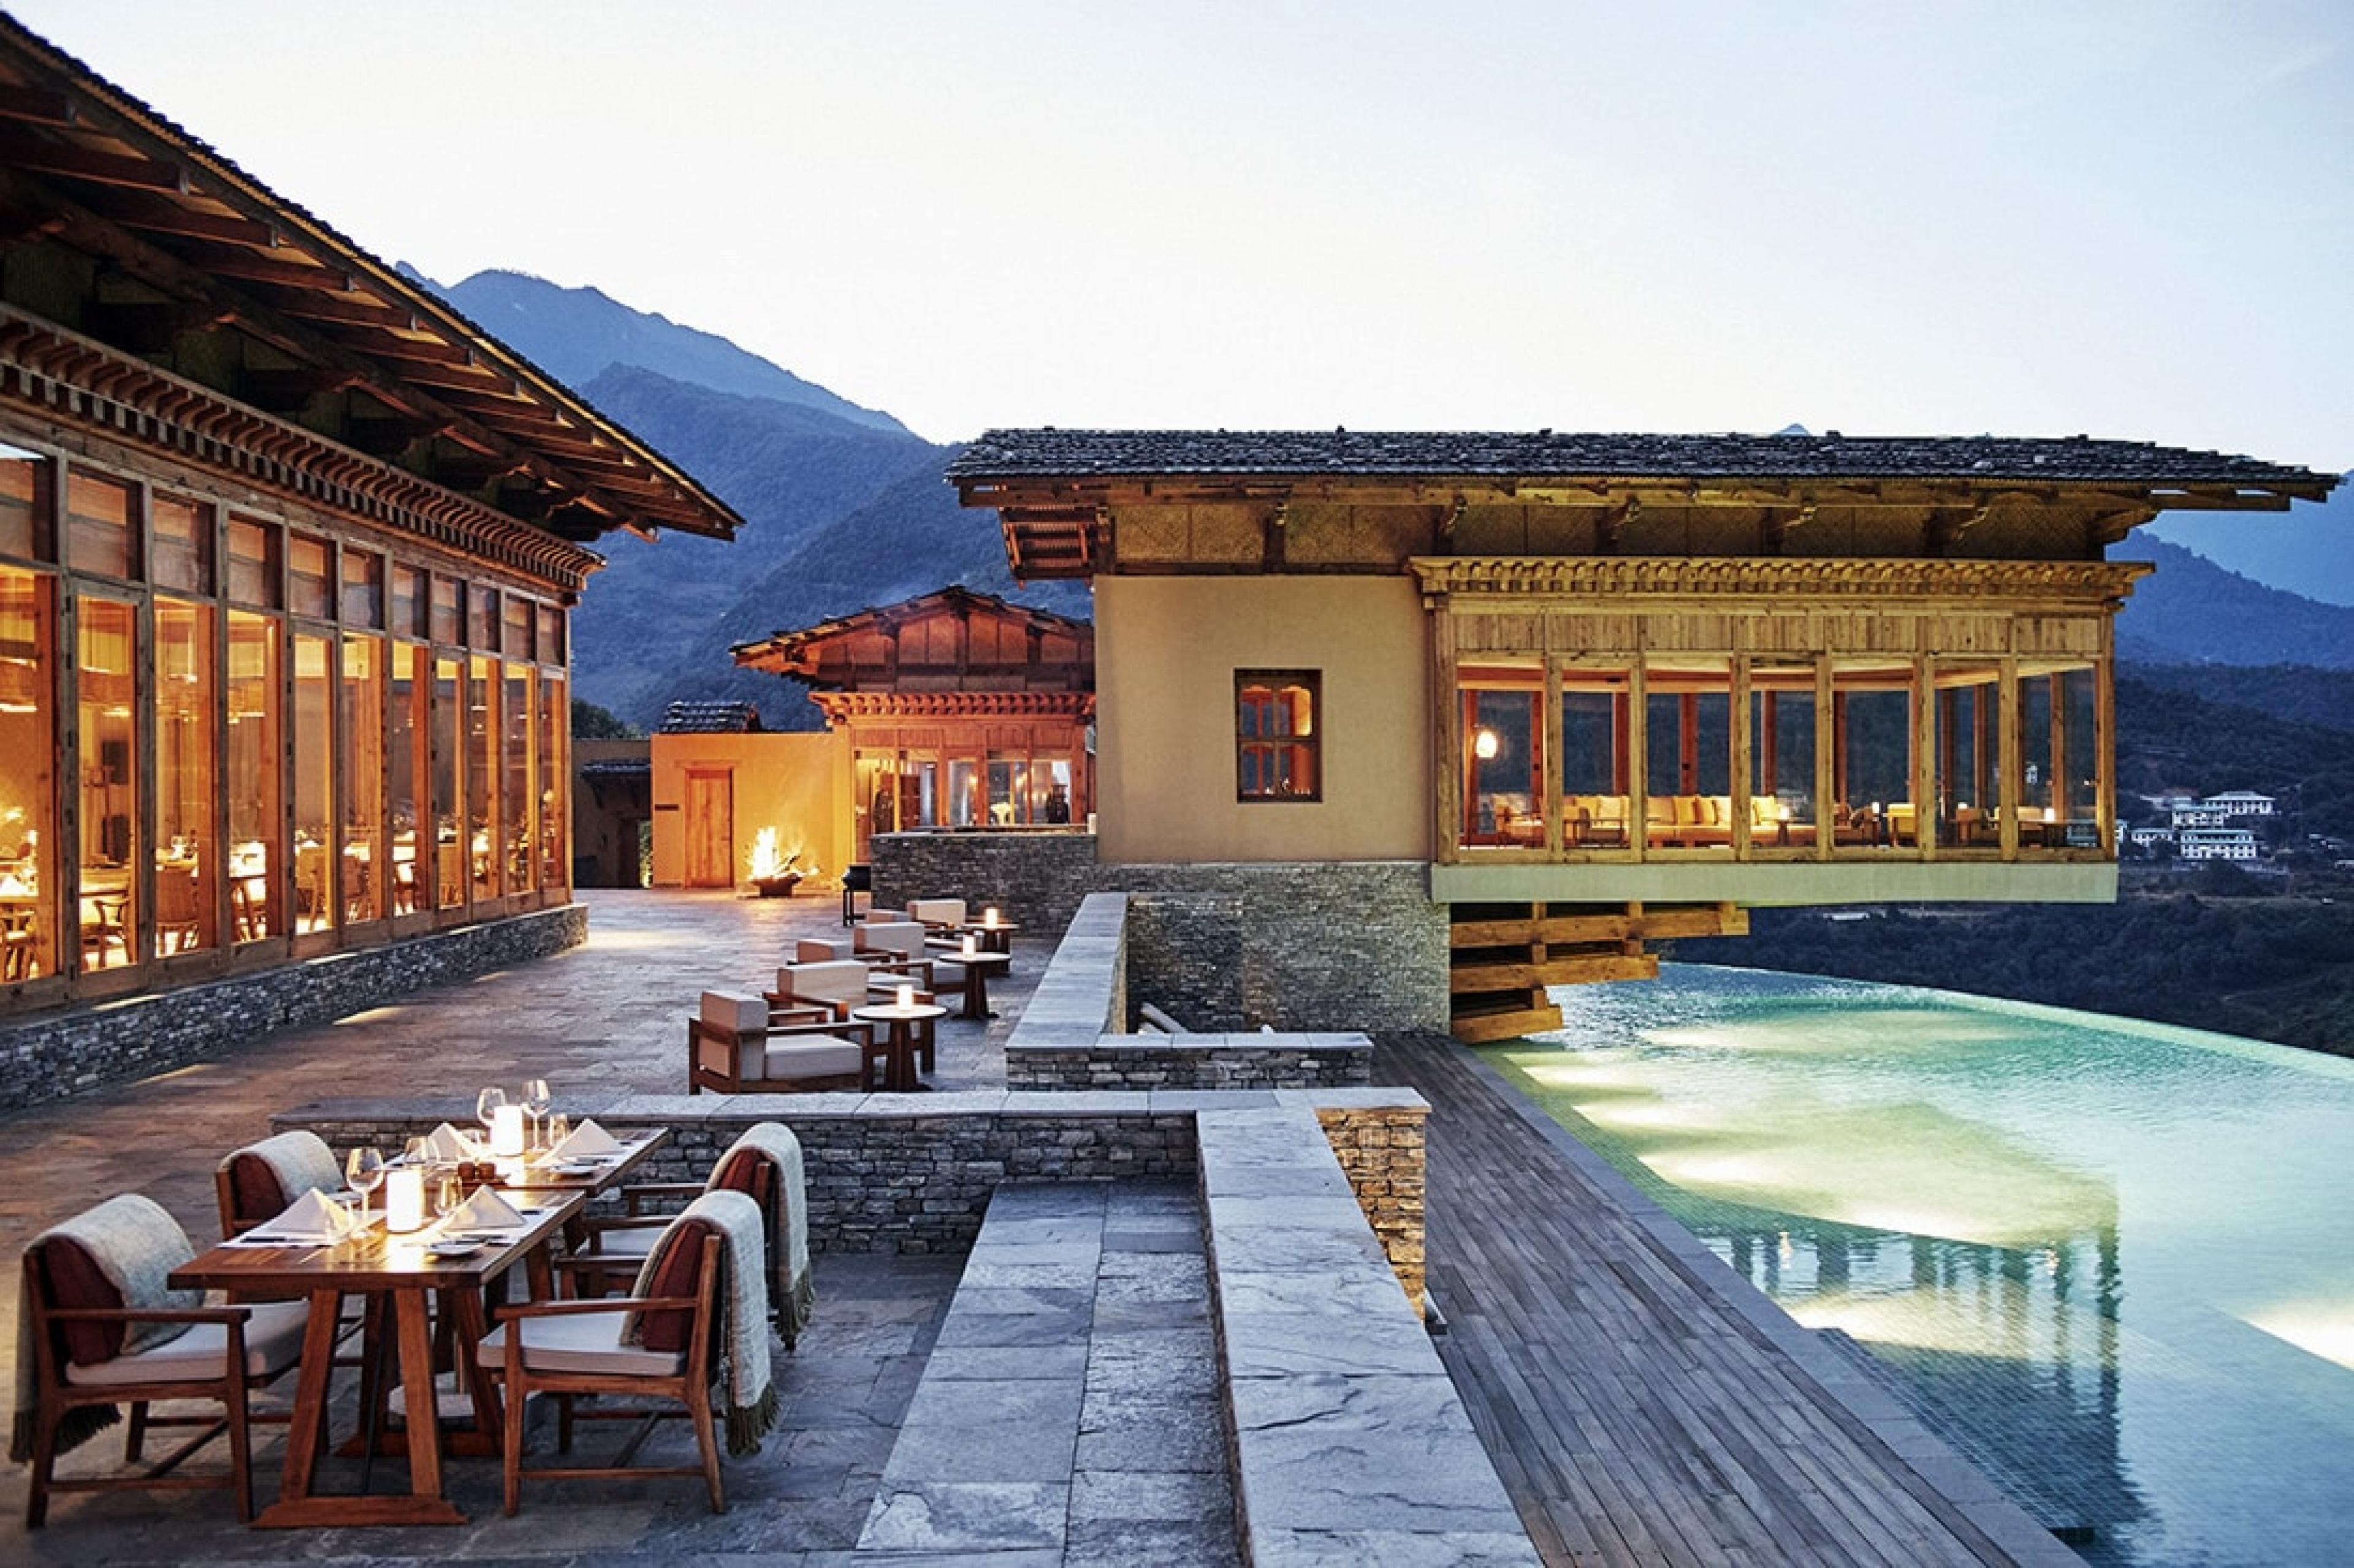 terrace in bhutan with pool and lodge buildings with mountains in background